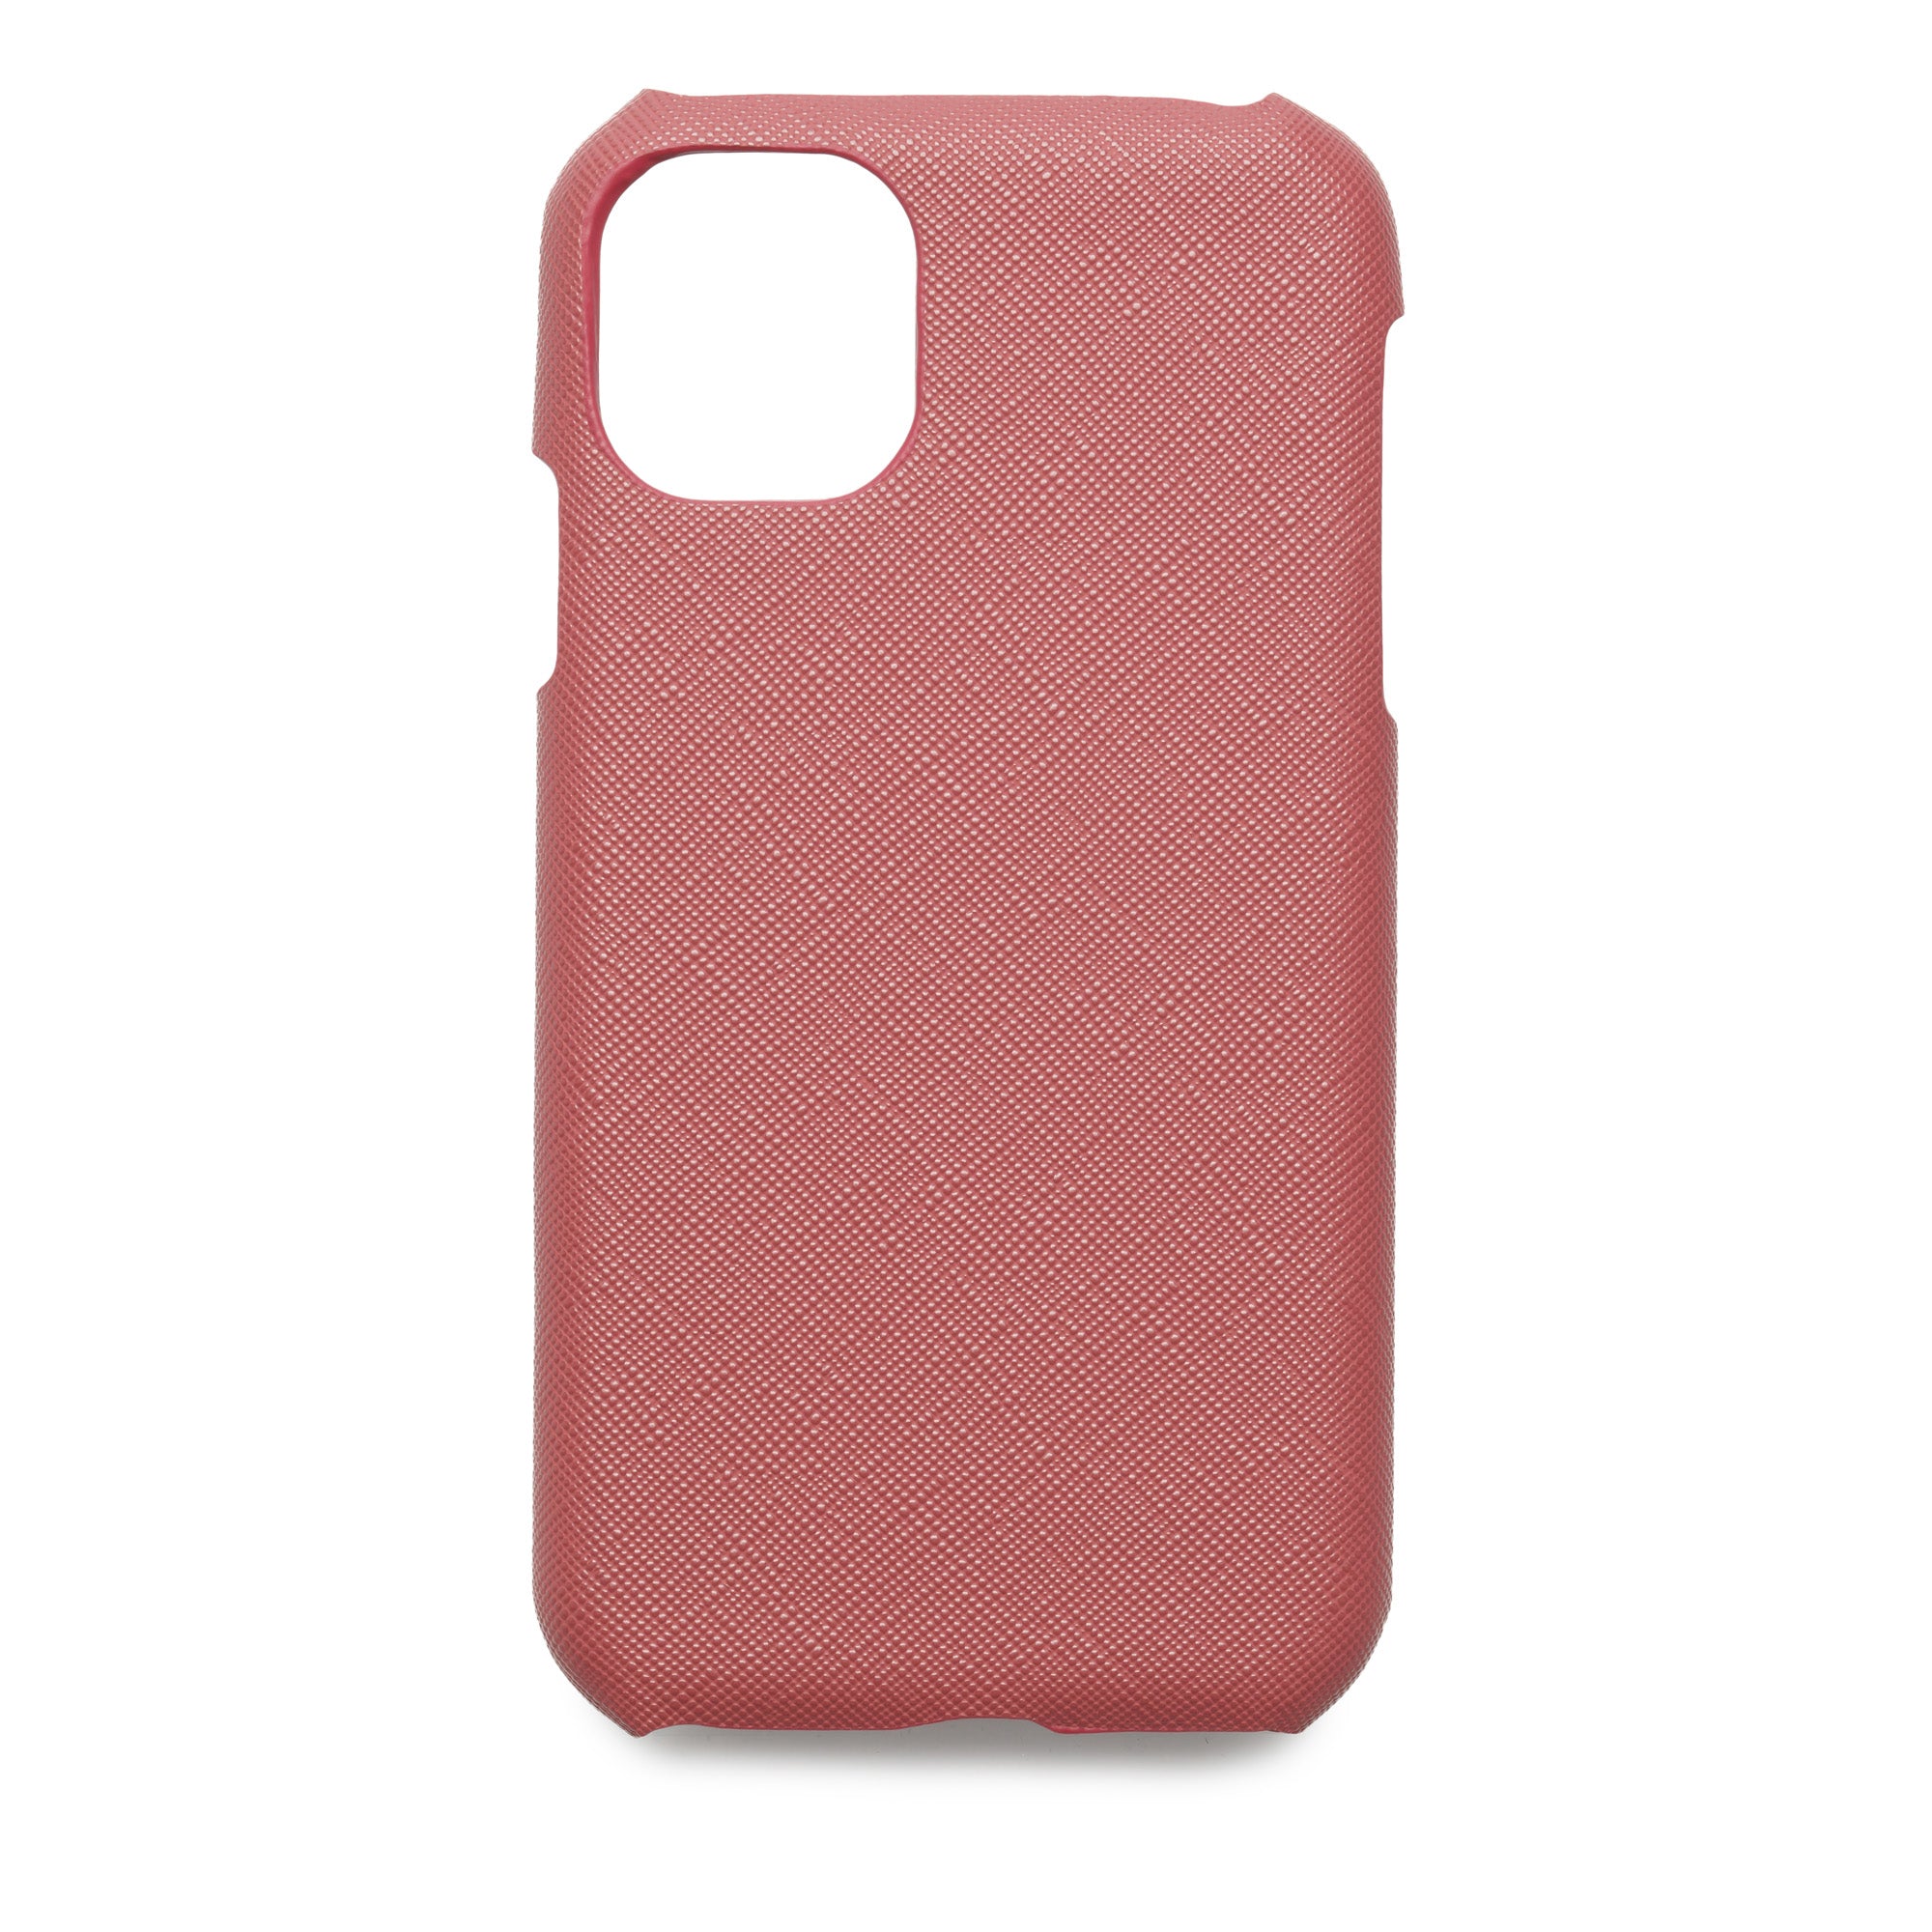 Dusty Rose Saffiano - iPhone XR / iPhone 11